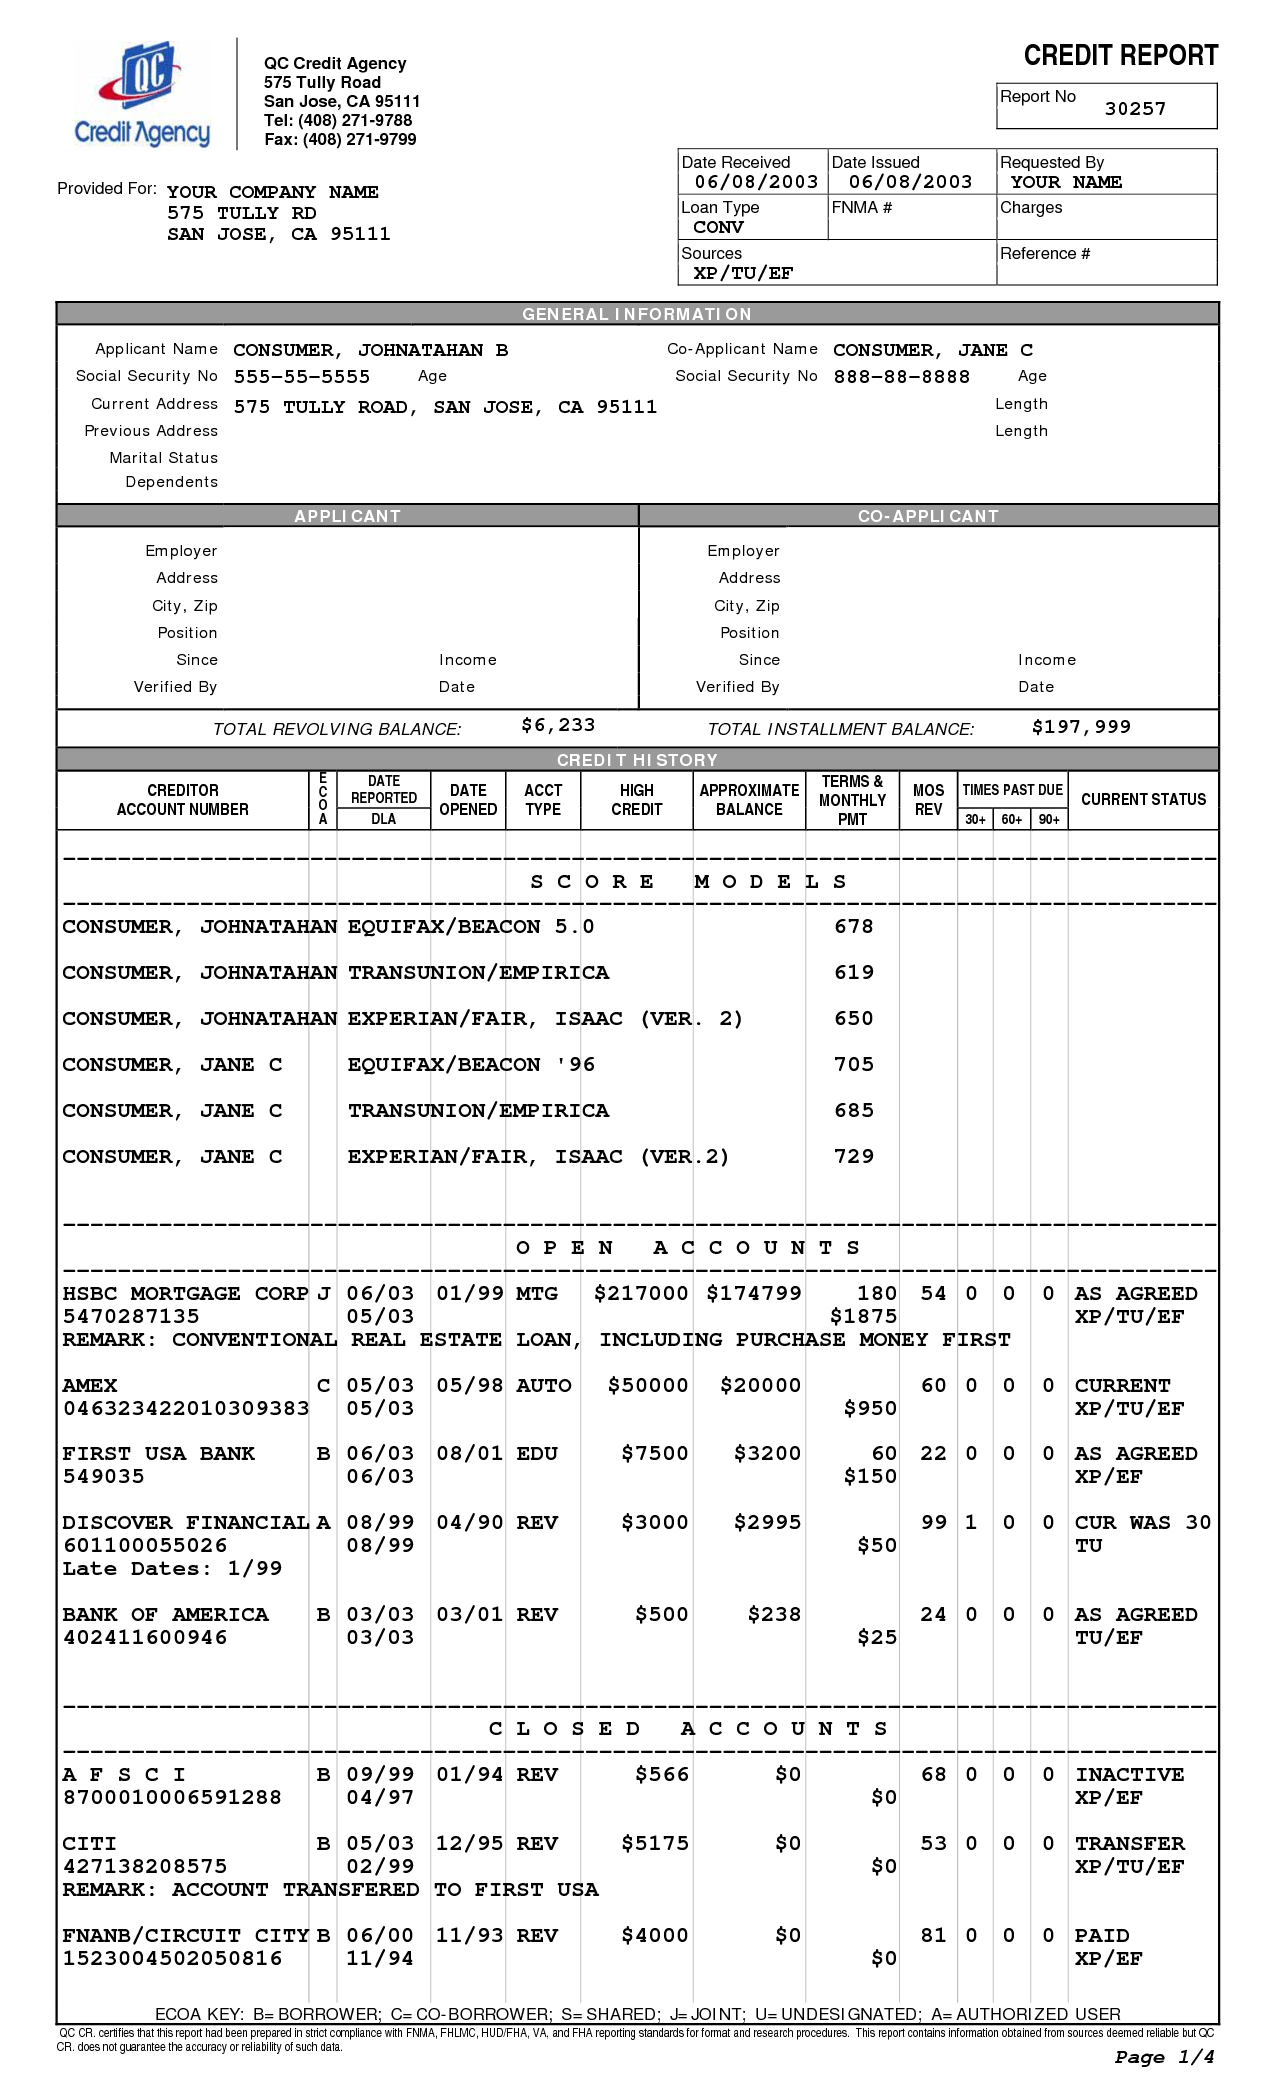 Credit Reports Template | aplg planetariums.org